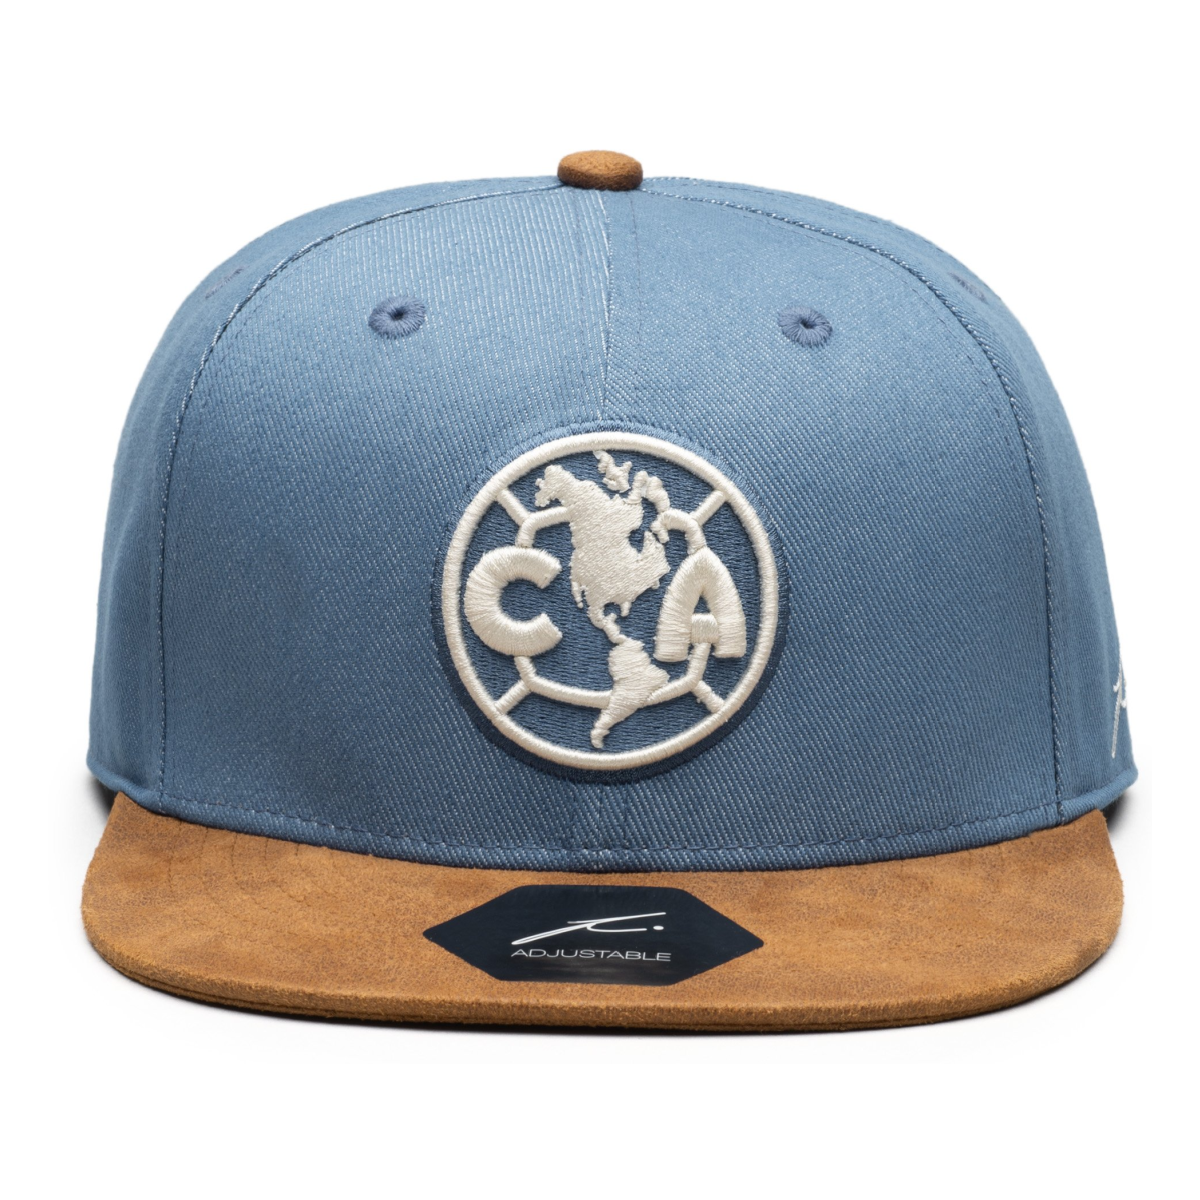 Fi Collections Club America Orion Snapback-Blue/Brown